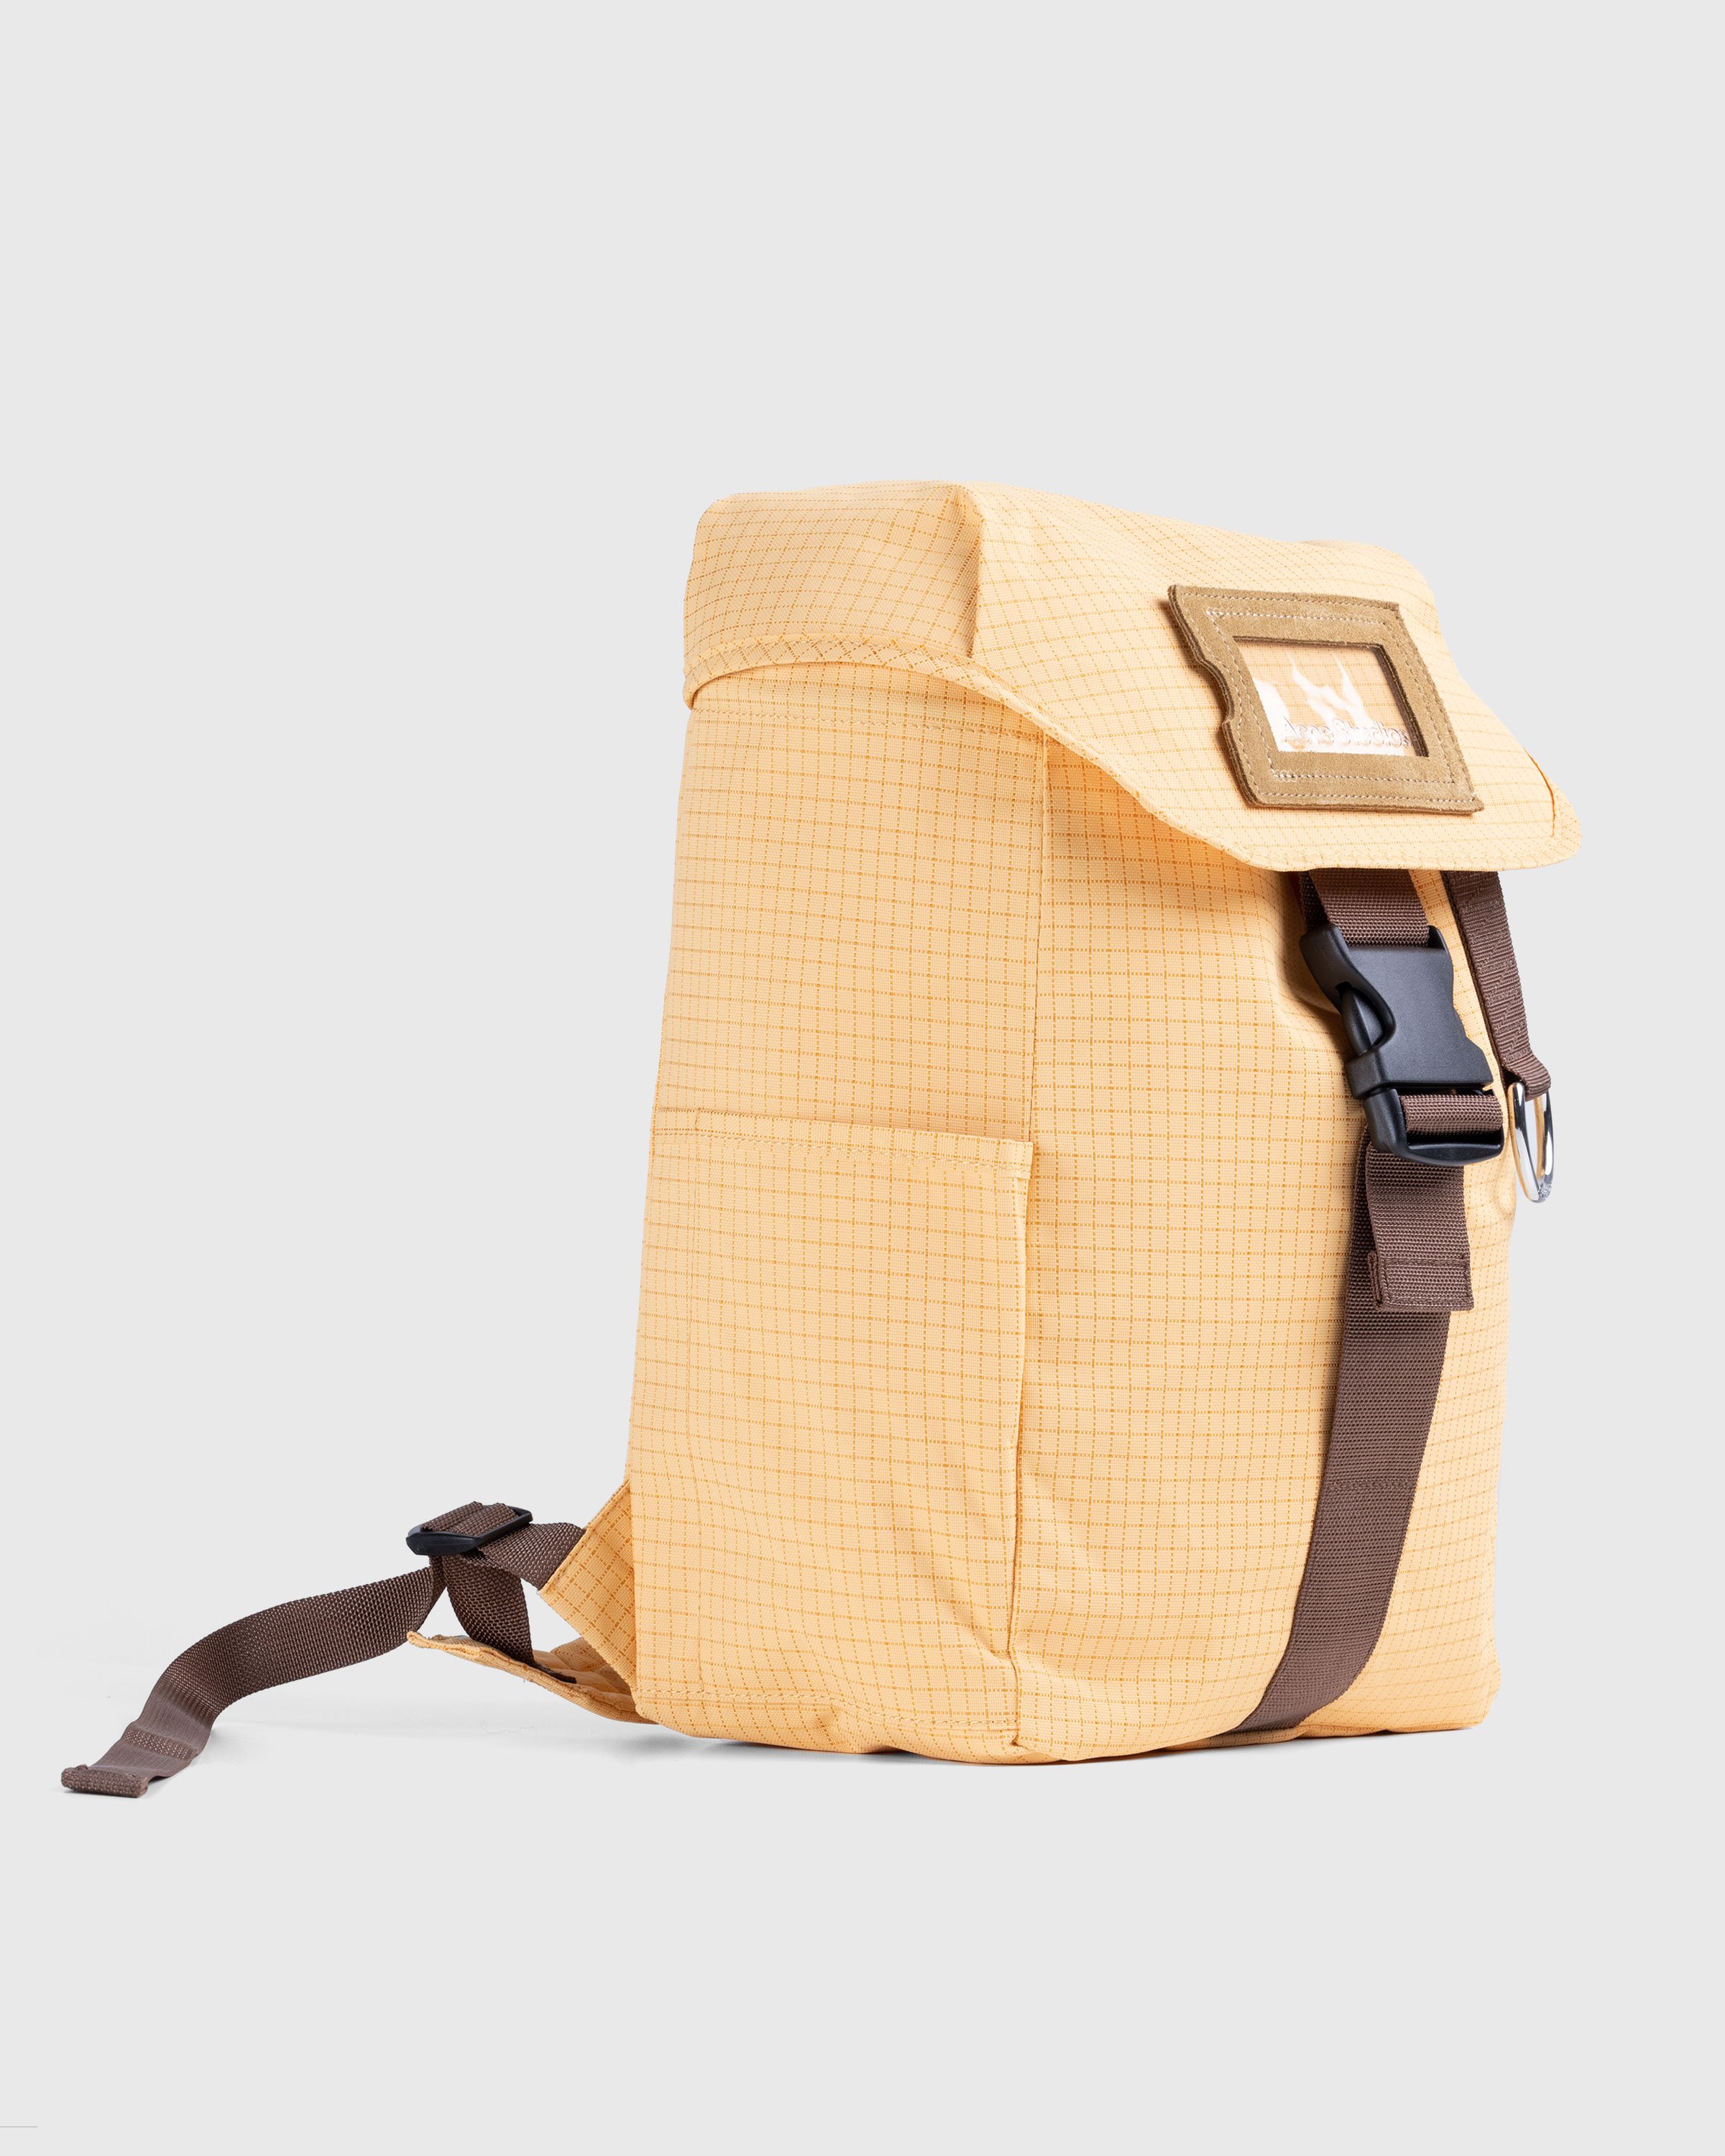 Acne Studios - Ripstop Nylon Backpack Yellow/Brown - Accessories - Multi - Image 3